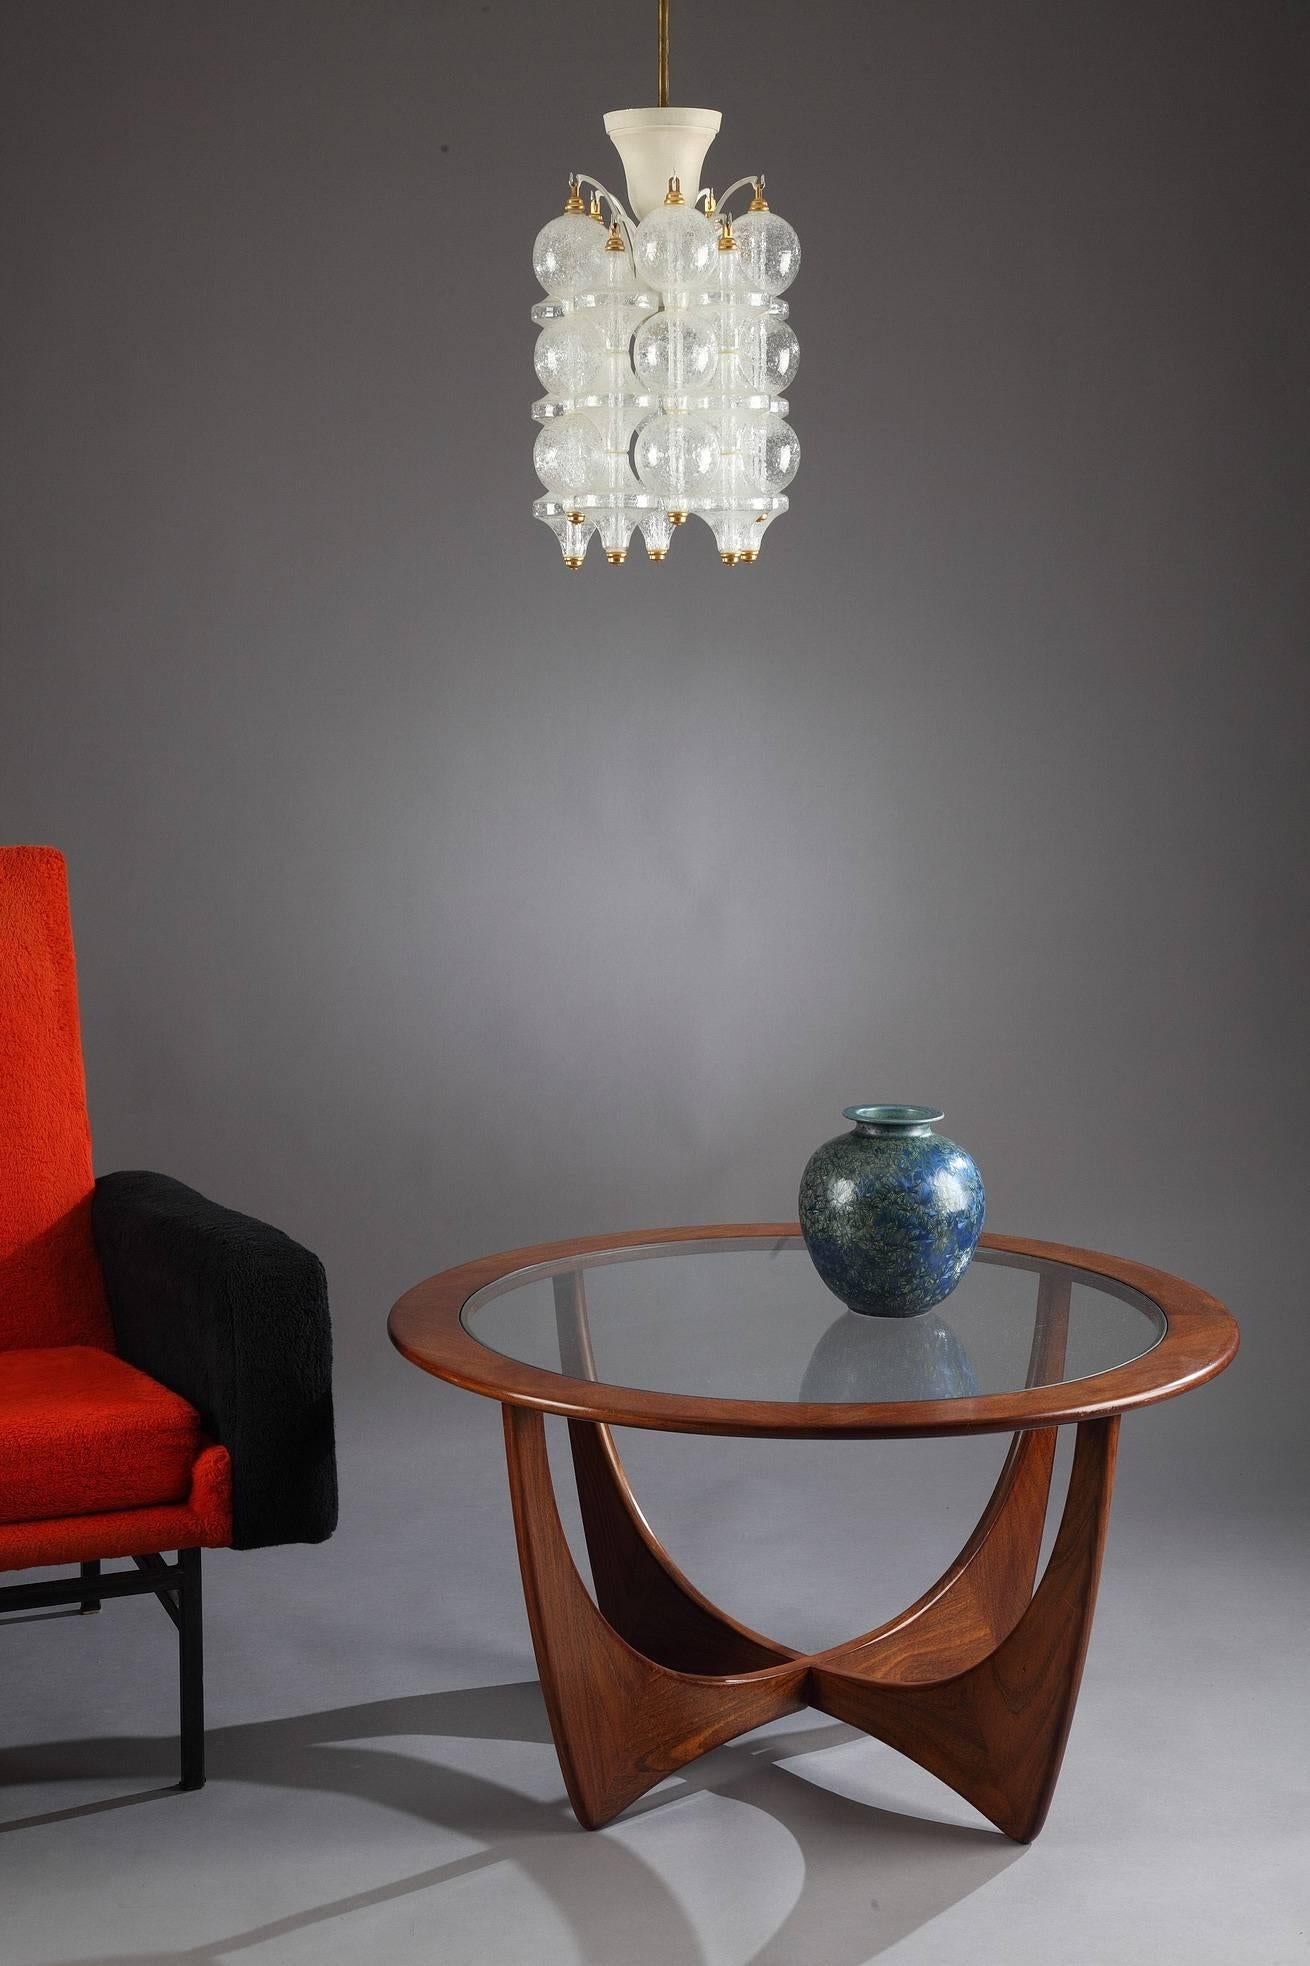 20th Century Lacquered Iron and Glass Chandelier in Venini Taste 2